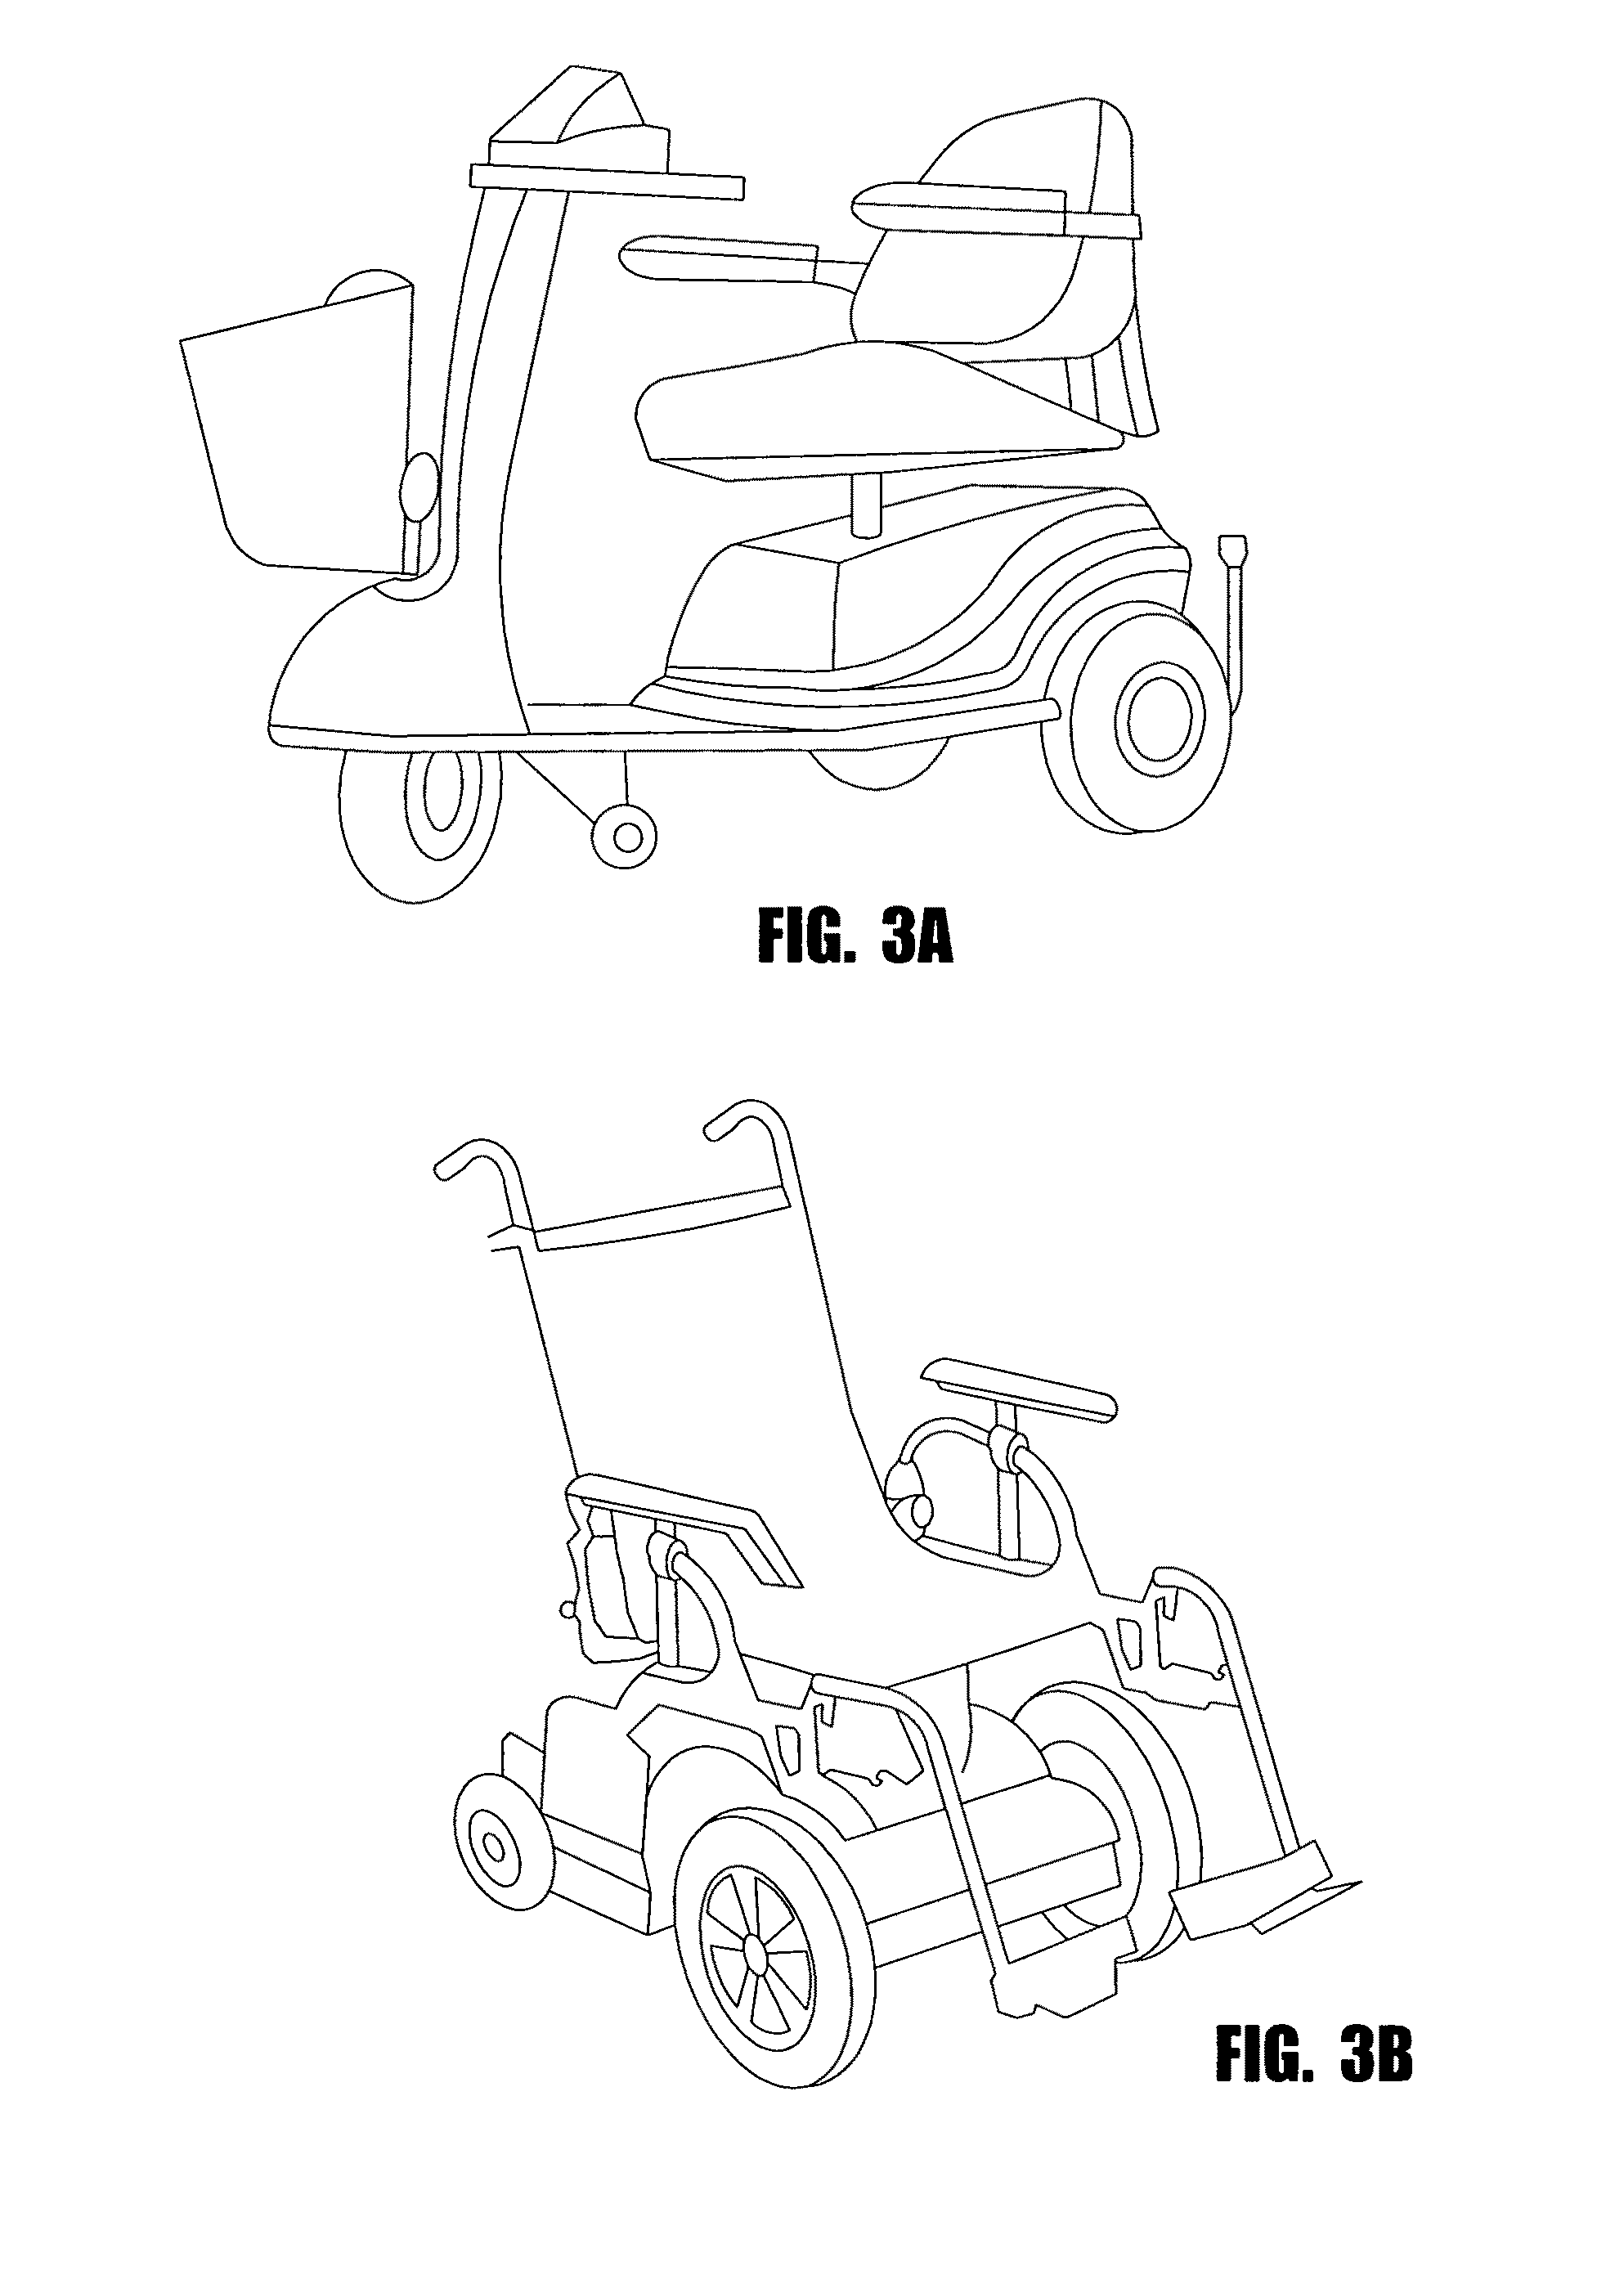 Personal vehicle